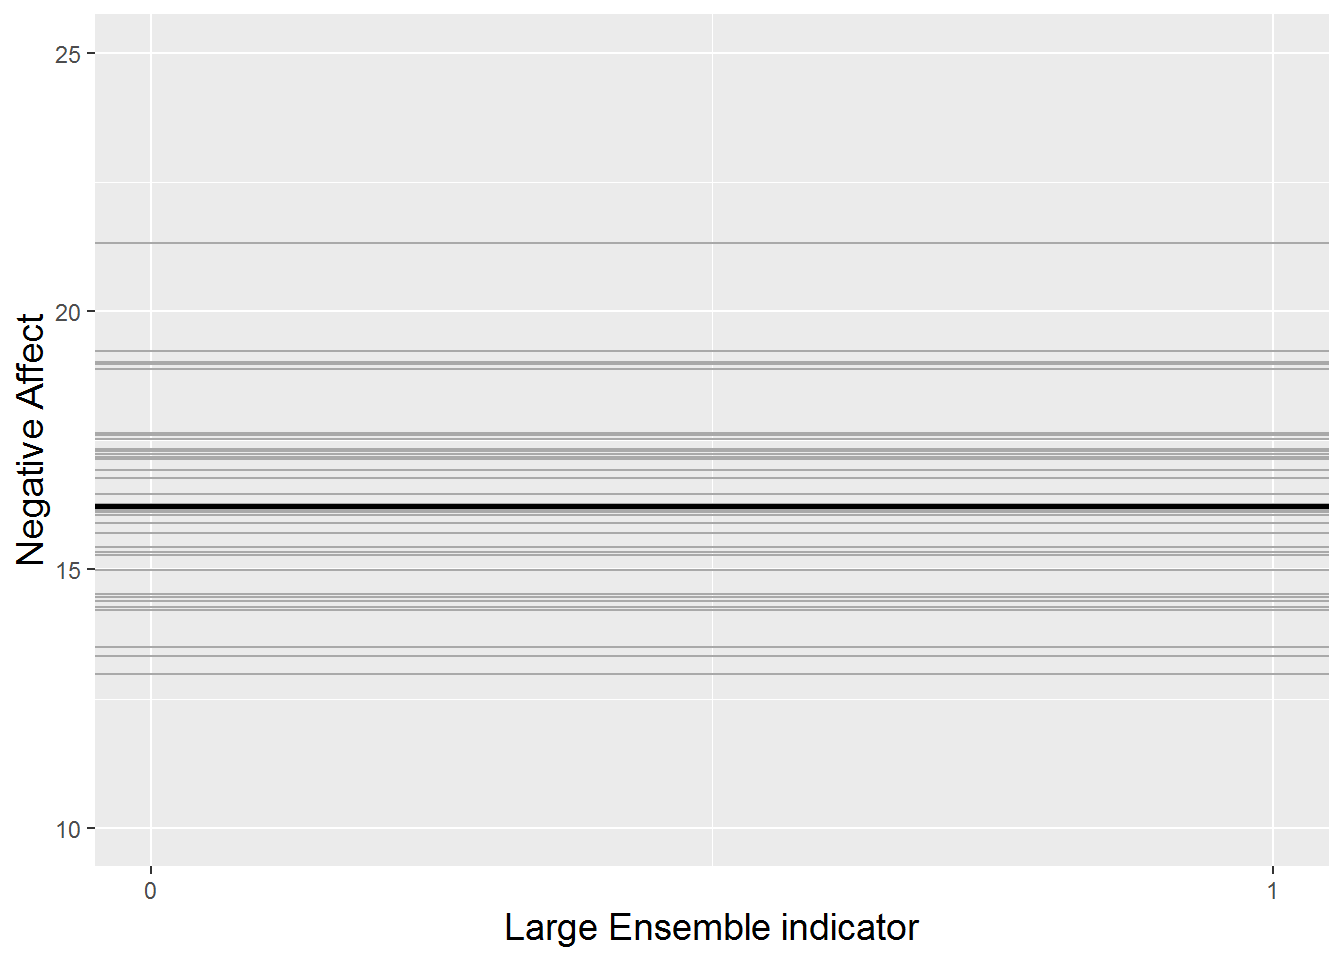 The random intercepts model fitted to the music performance anxiety data.  Each gray line represents one subject, and the thicker black line represents the trend across all subjects.